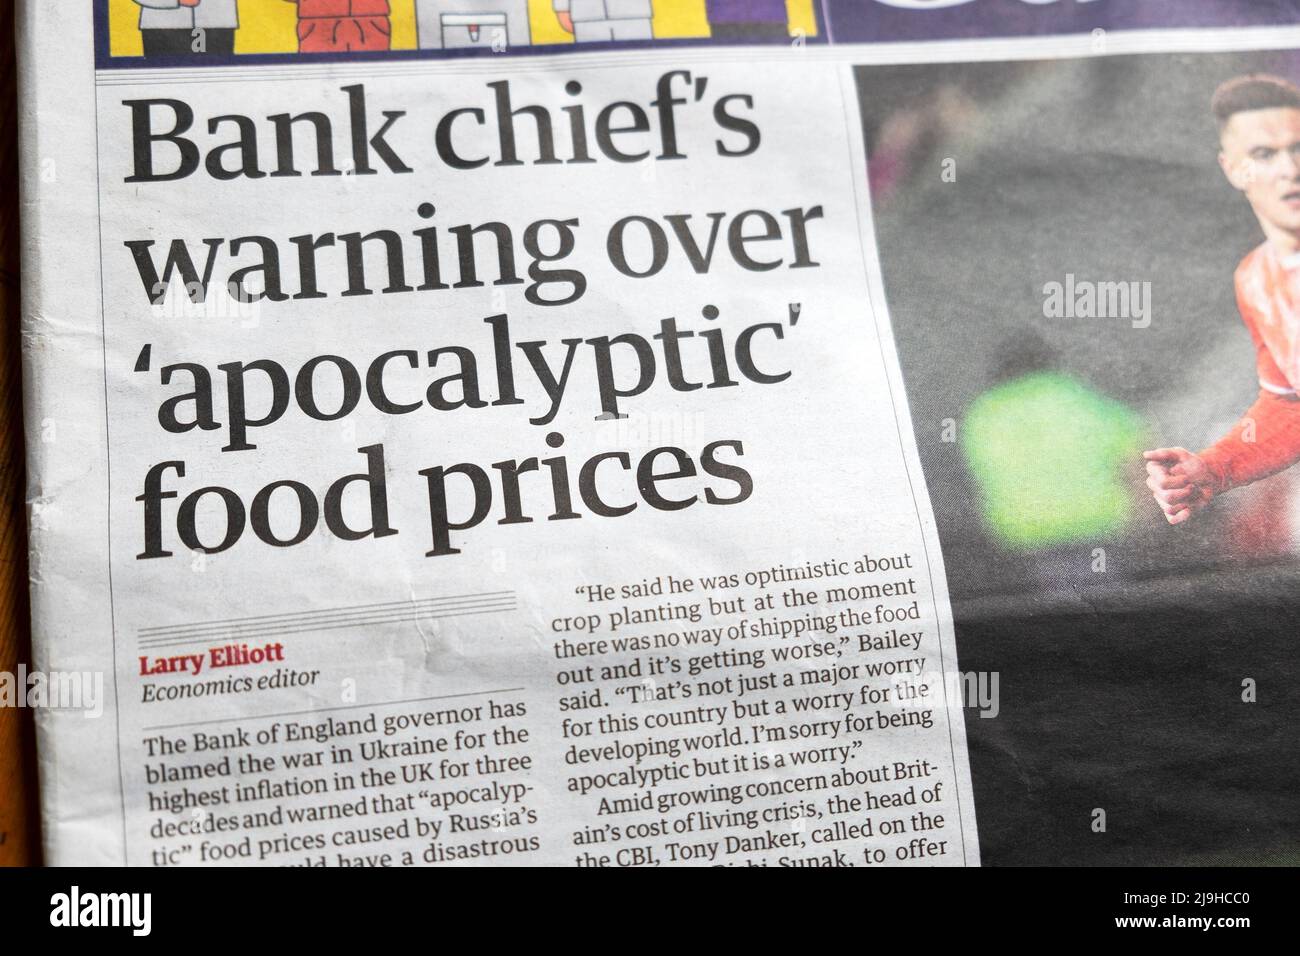 'Bank chief's warning over 'apocalyptic' food prices' Guardian newspaper headline front page cost of living clipping 17 May 2022 in London England UK Stock Photo